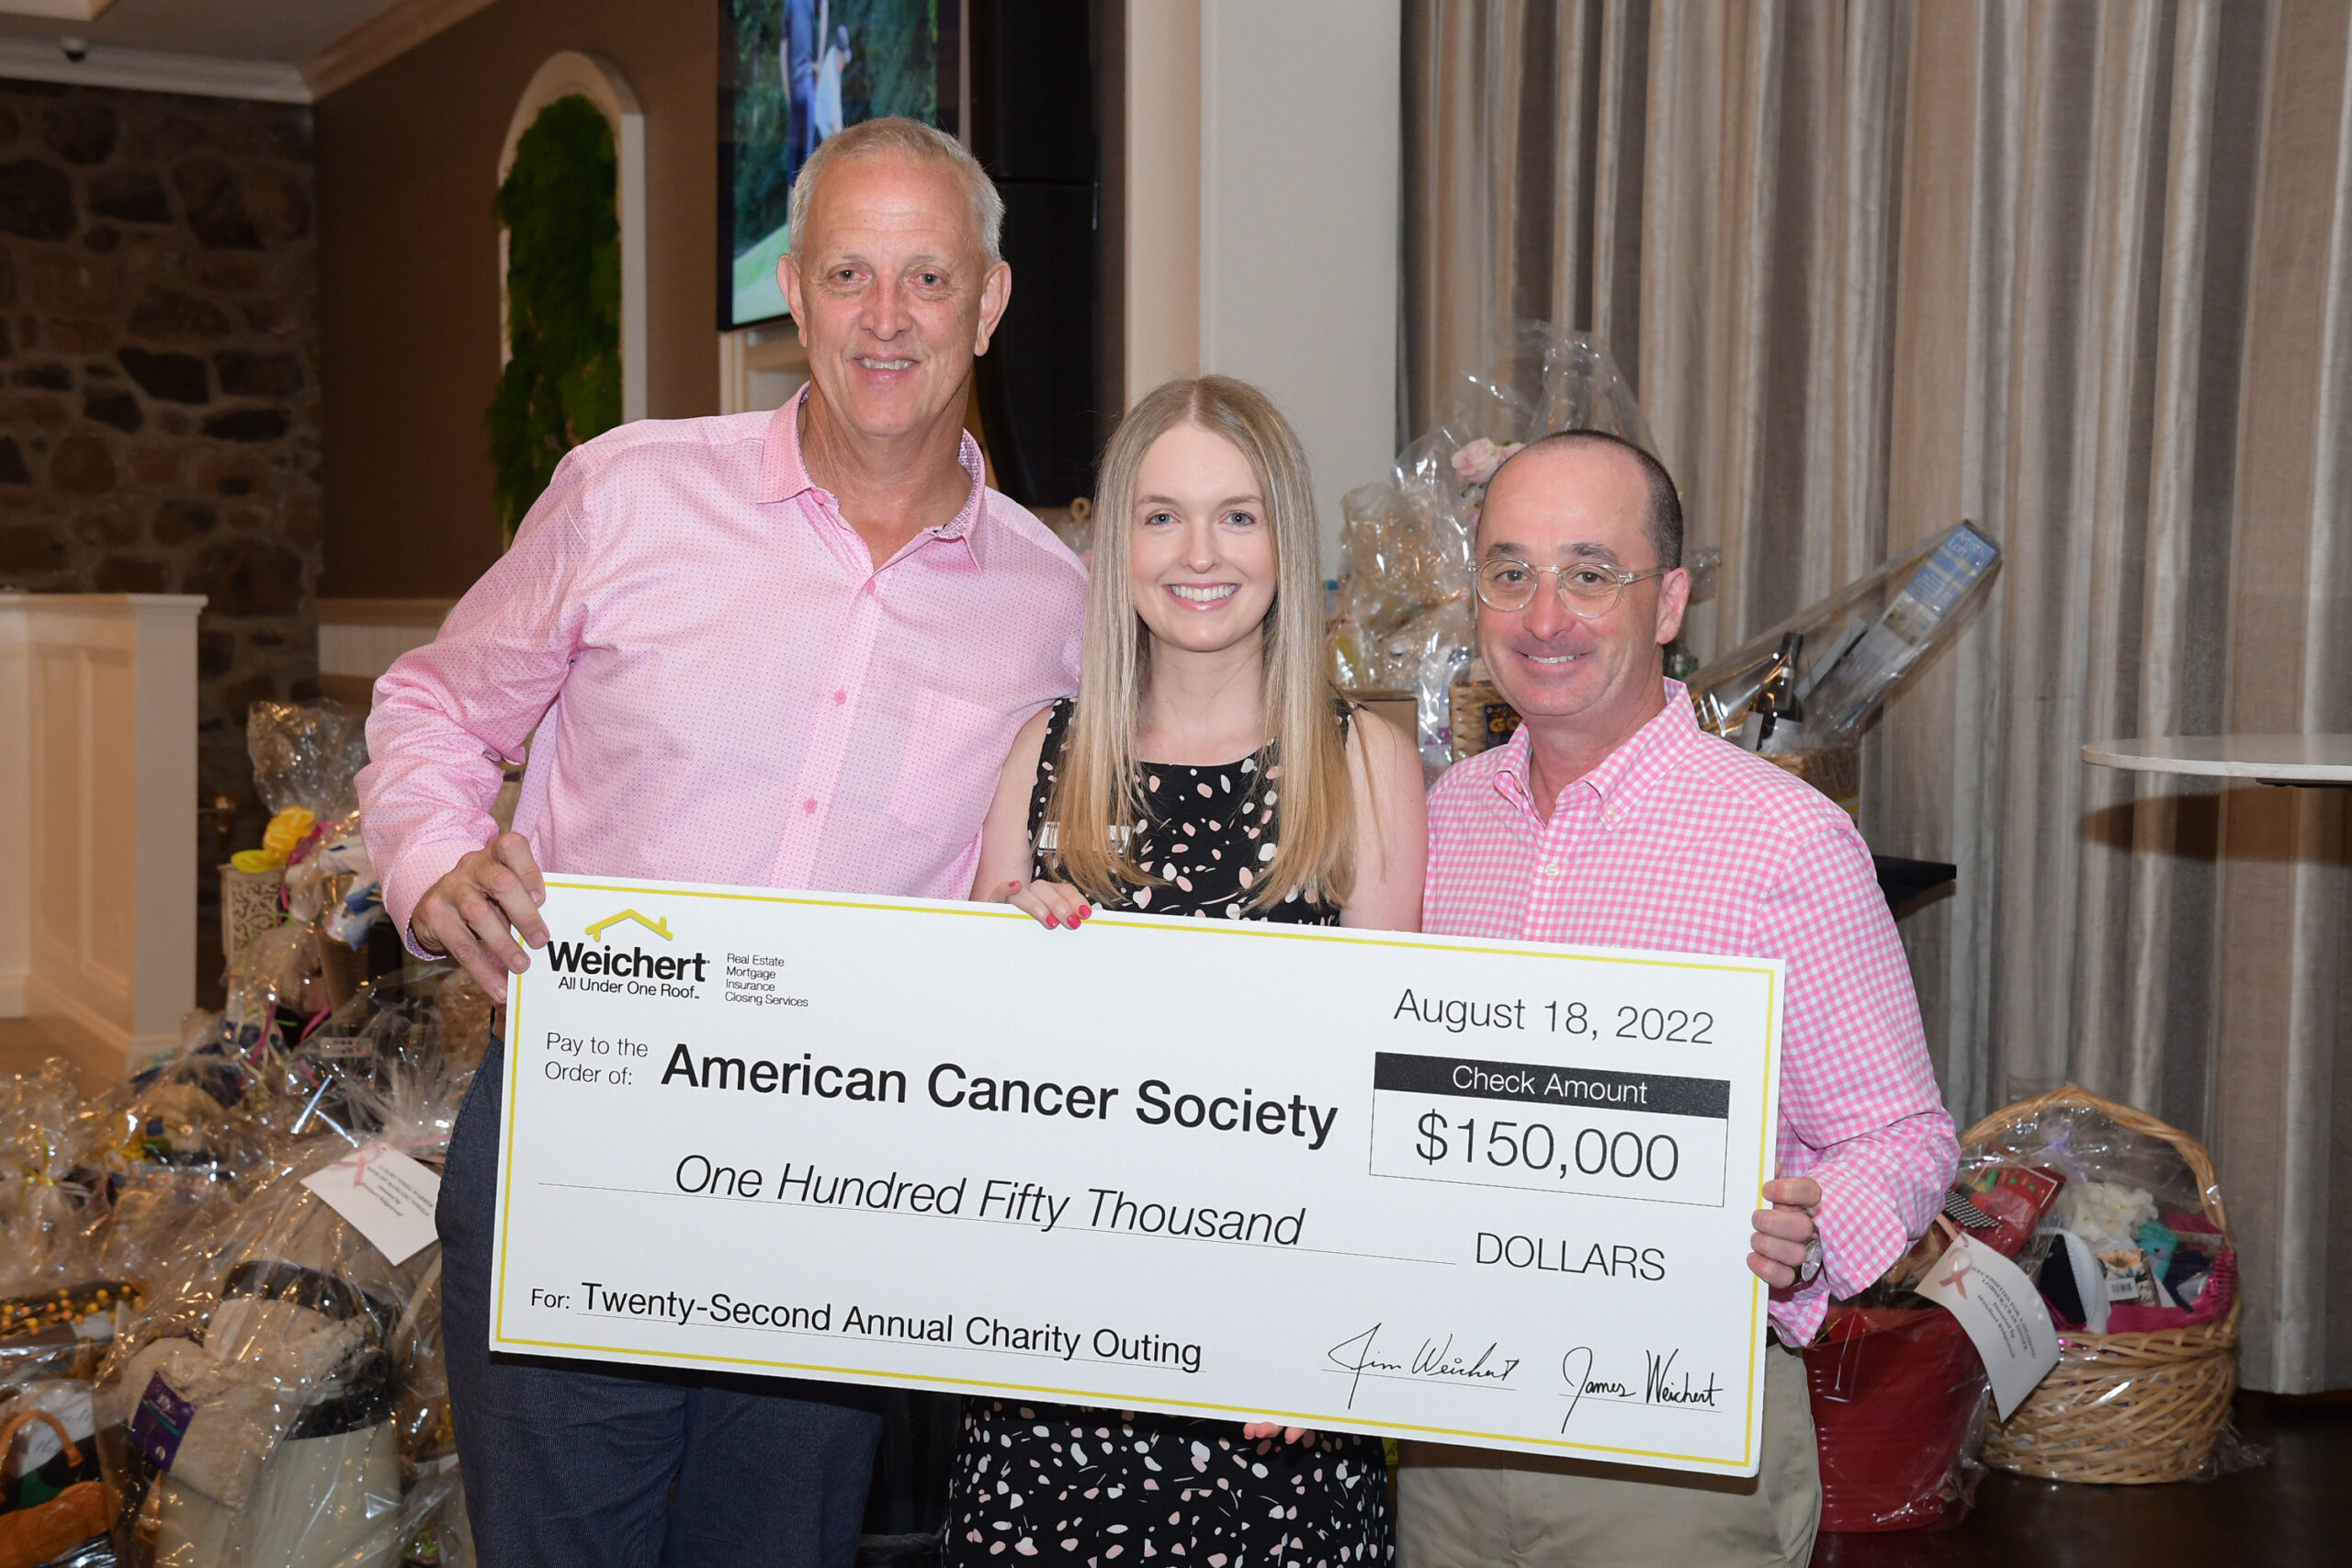 (Left) John Mahoney, president of Weichert Insurance Agency, and (right) Joe McDonald, regional vice president of Weichert, Realtors and chairperson of Weichert’s 22nd Annual Charity Outing, present a check for $150,000 to Katelyn French, senior corporate relations manager for the American Cancer Society.